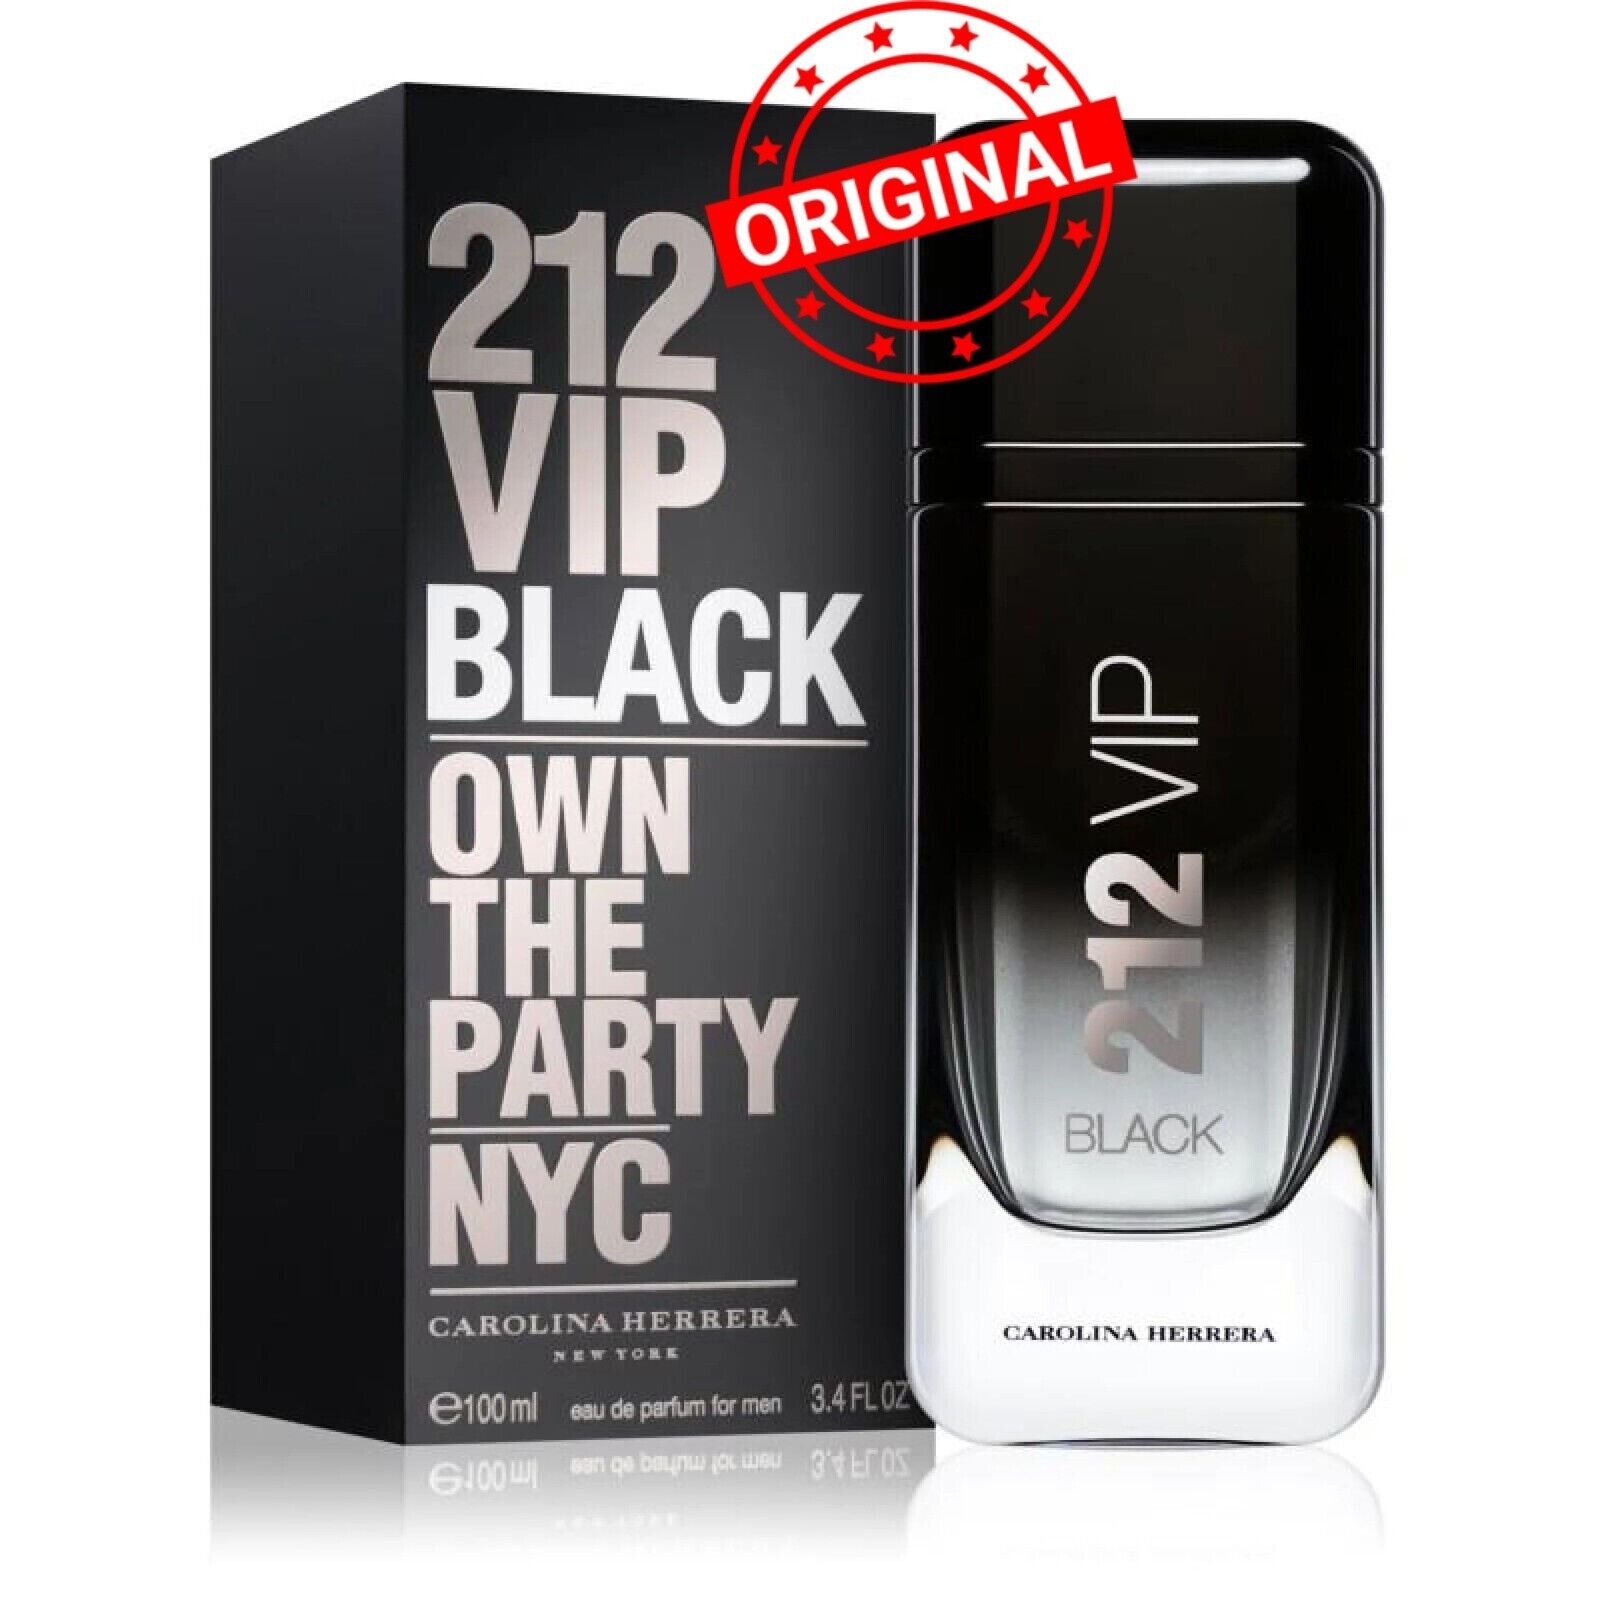 212 vip black own the party nyc